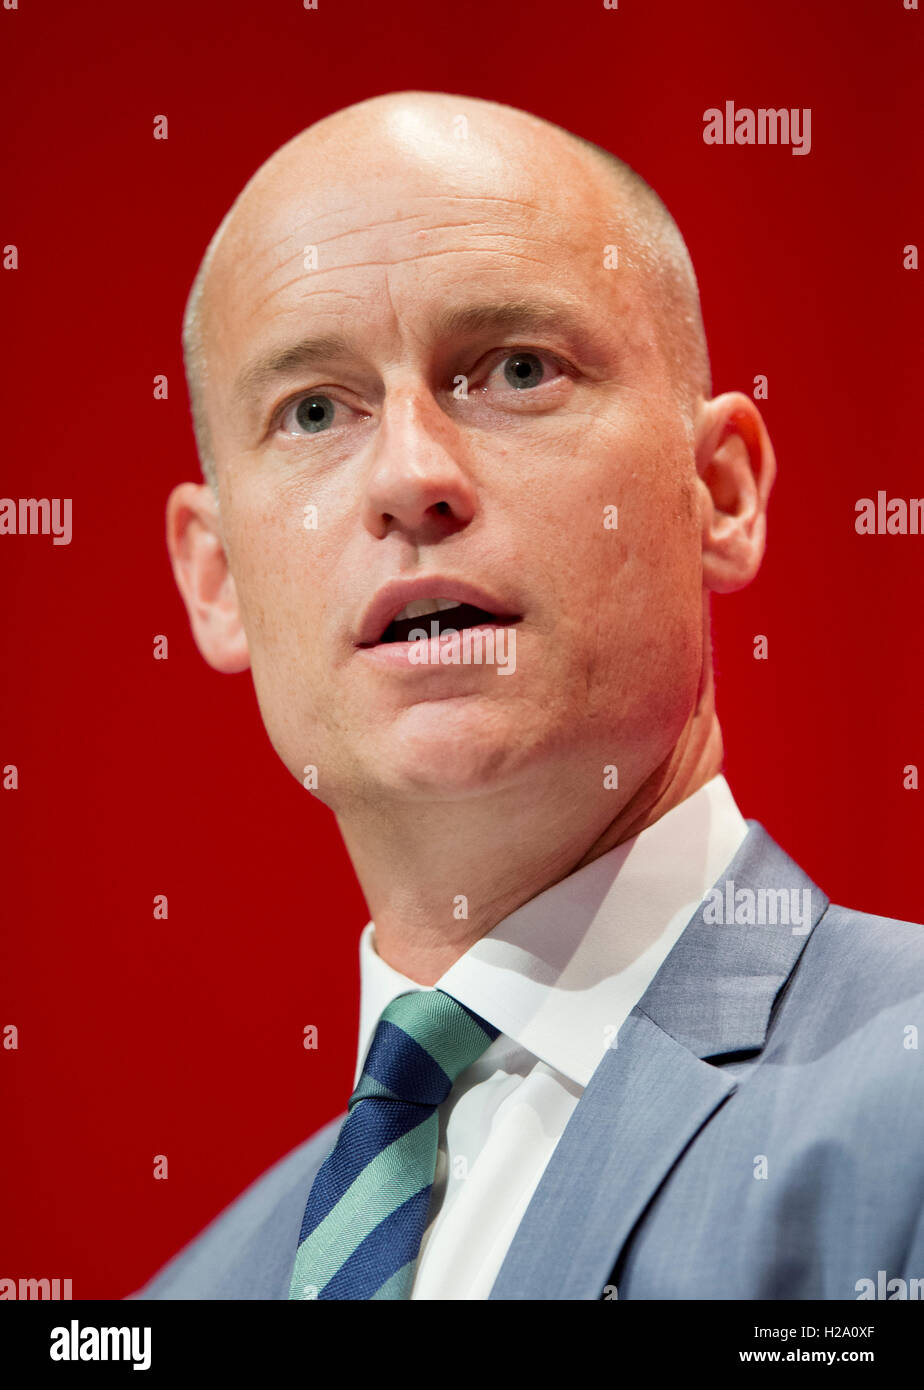 Liverpool, UK. 26th September 2016. Stephen Kinnock MP speaks at day two of the Labour Party Conference in Liverpool. Credit:  Russell Hart/Alamy Live News. Stock Photo